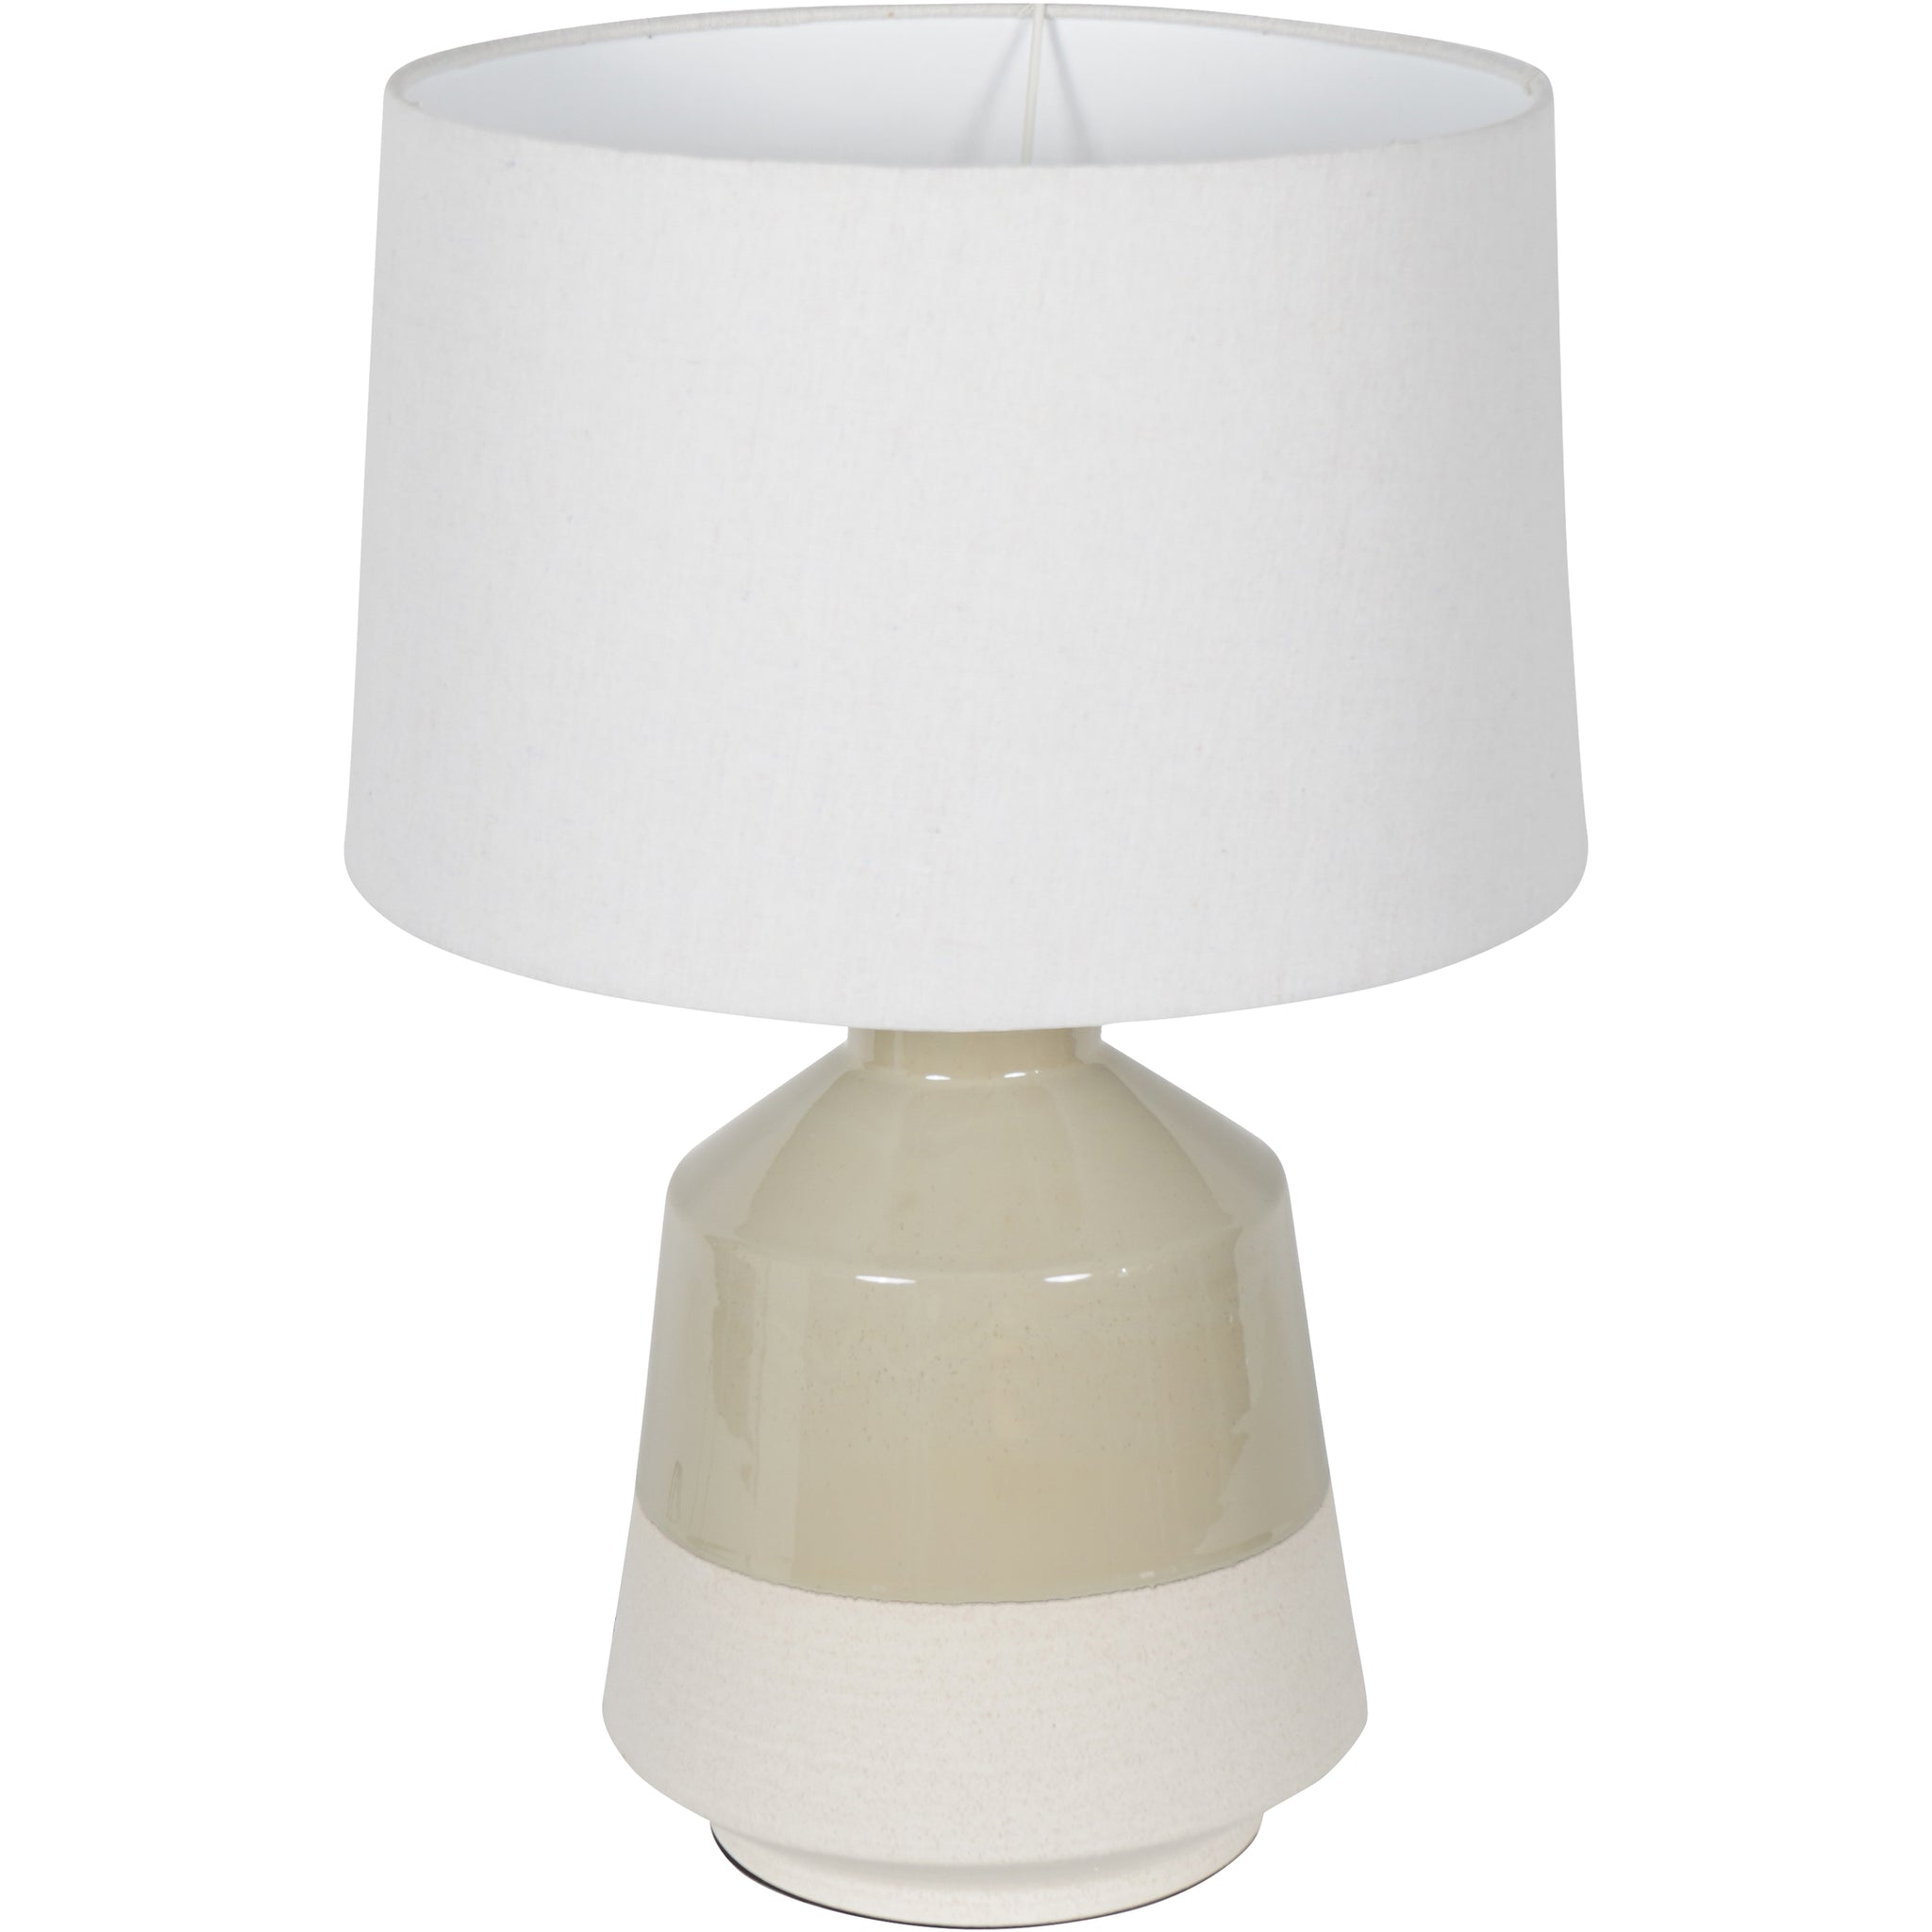 Chaucer Soft Green Dipped Glaze Table Lamp 58cm with Ivory Coolie Shade